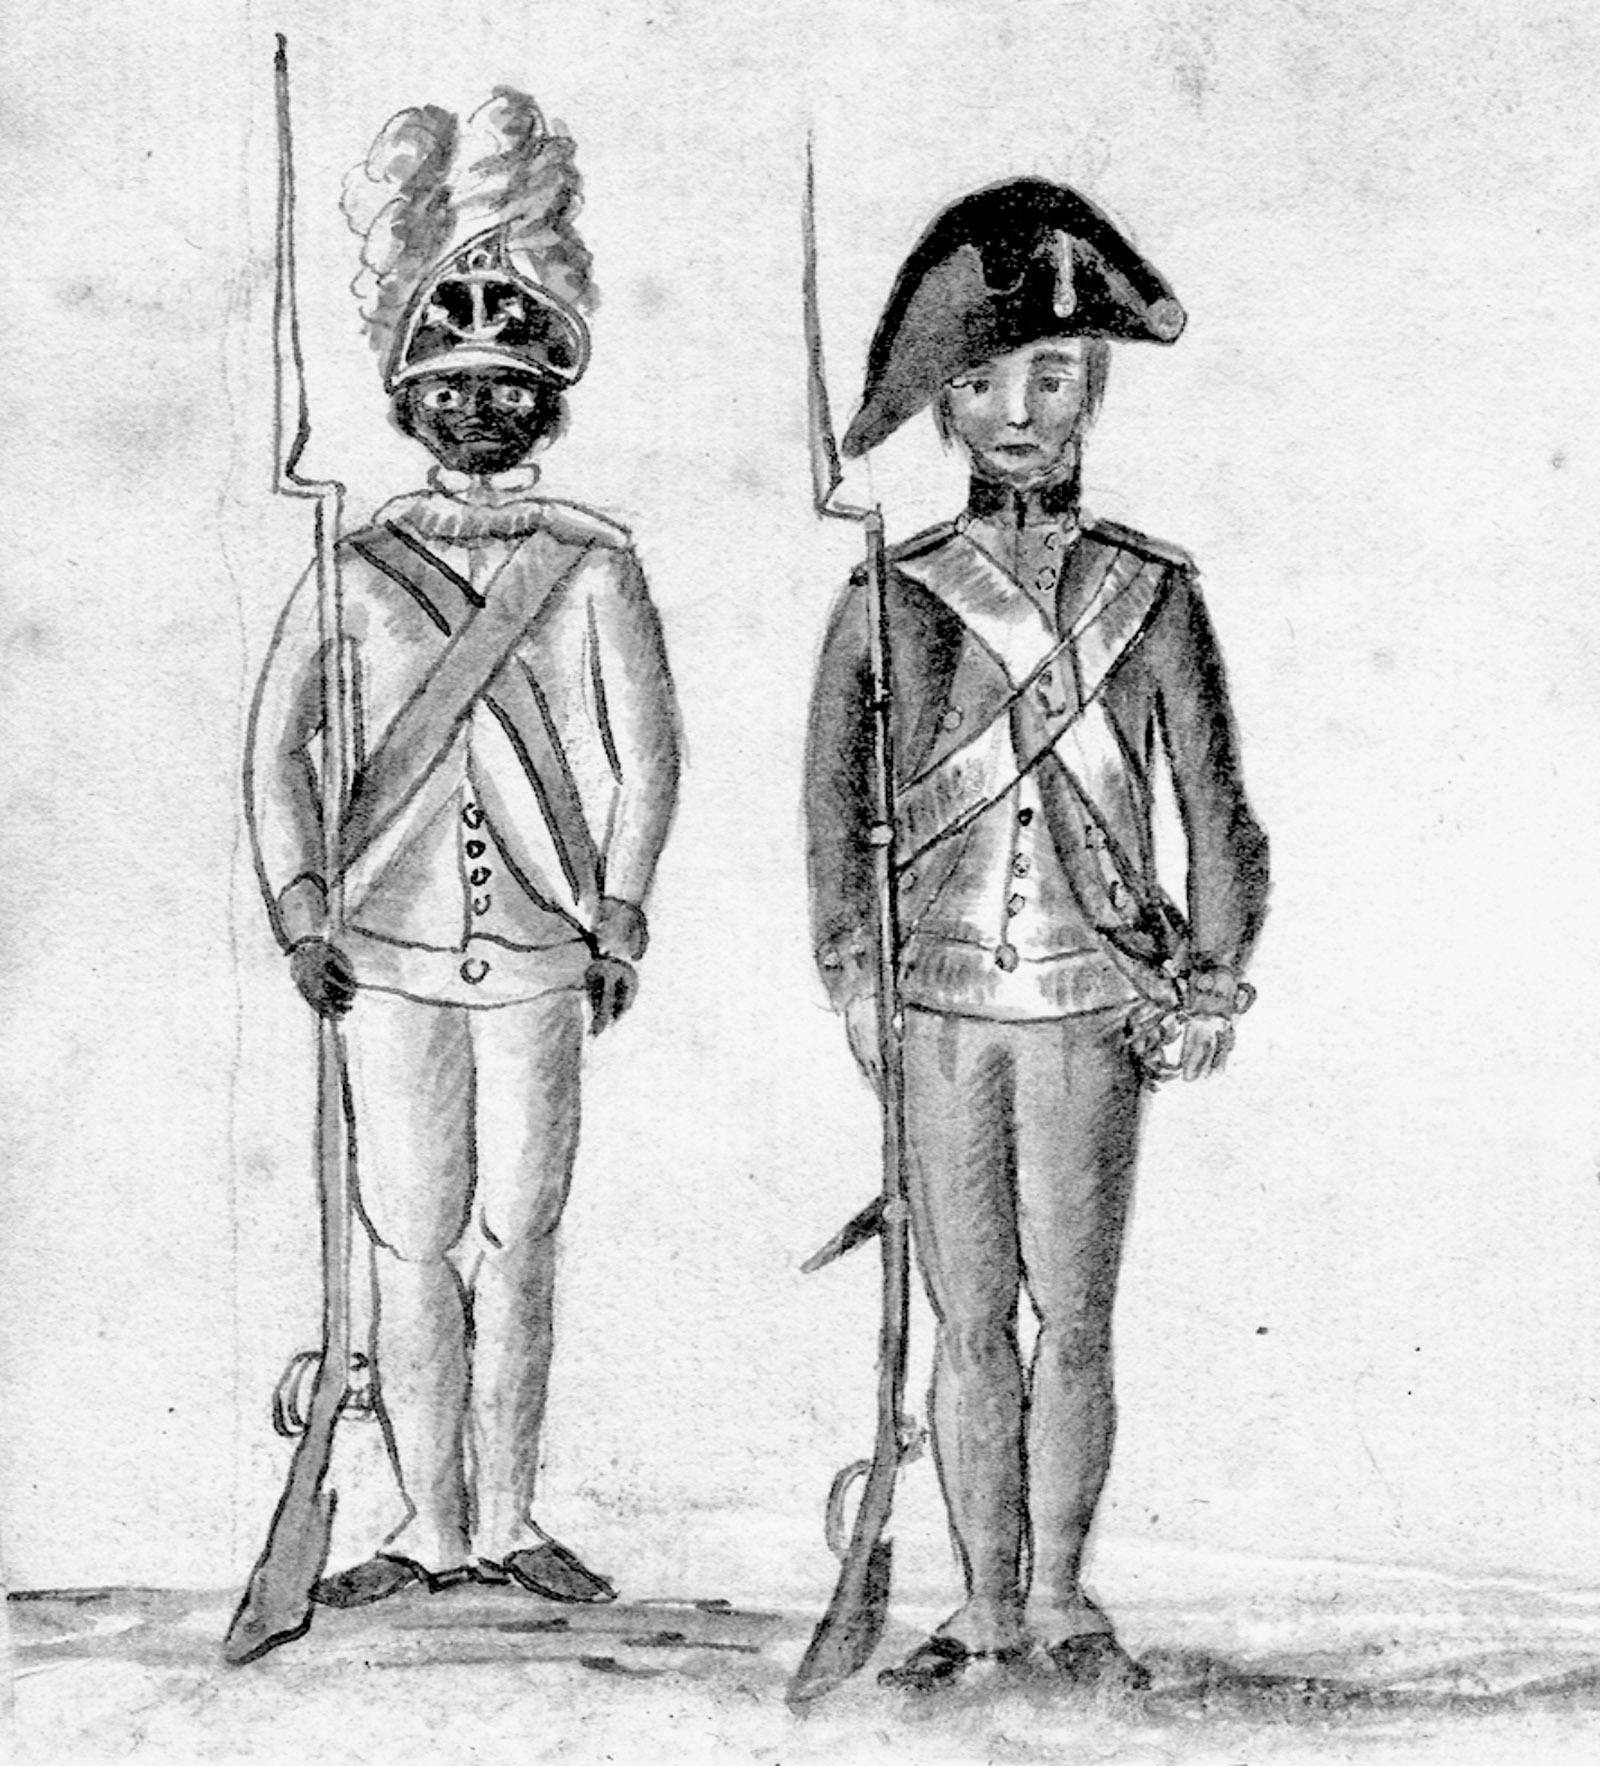 At left, a black soldier in the Yorktown campaign; detail of a sketch by Jean Baptiste Antoine de Verger, circa 1781